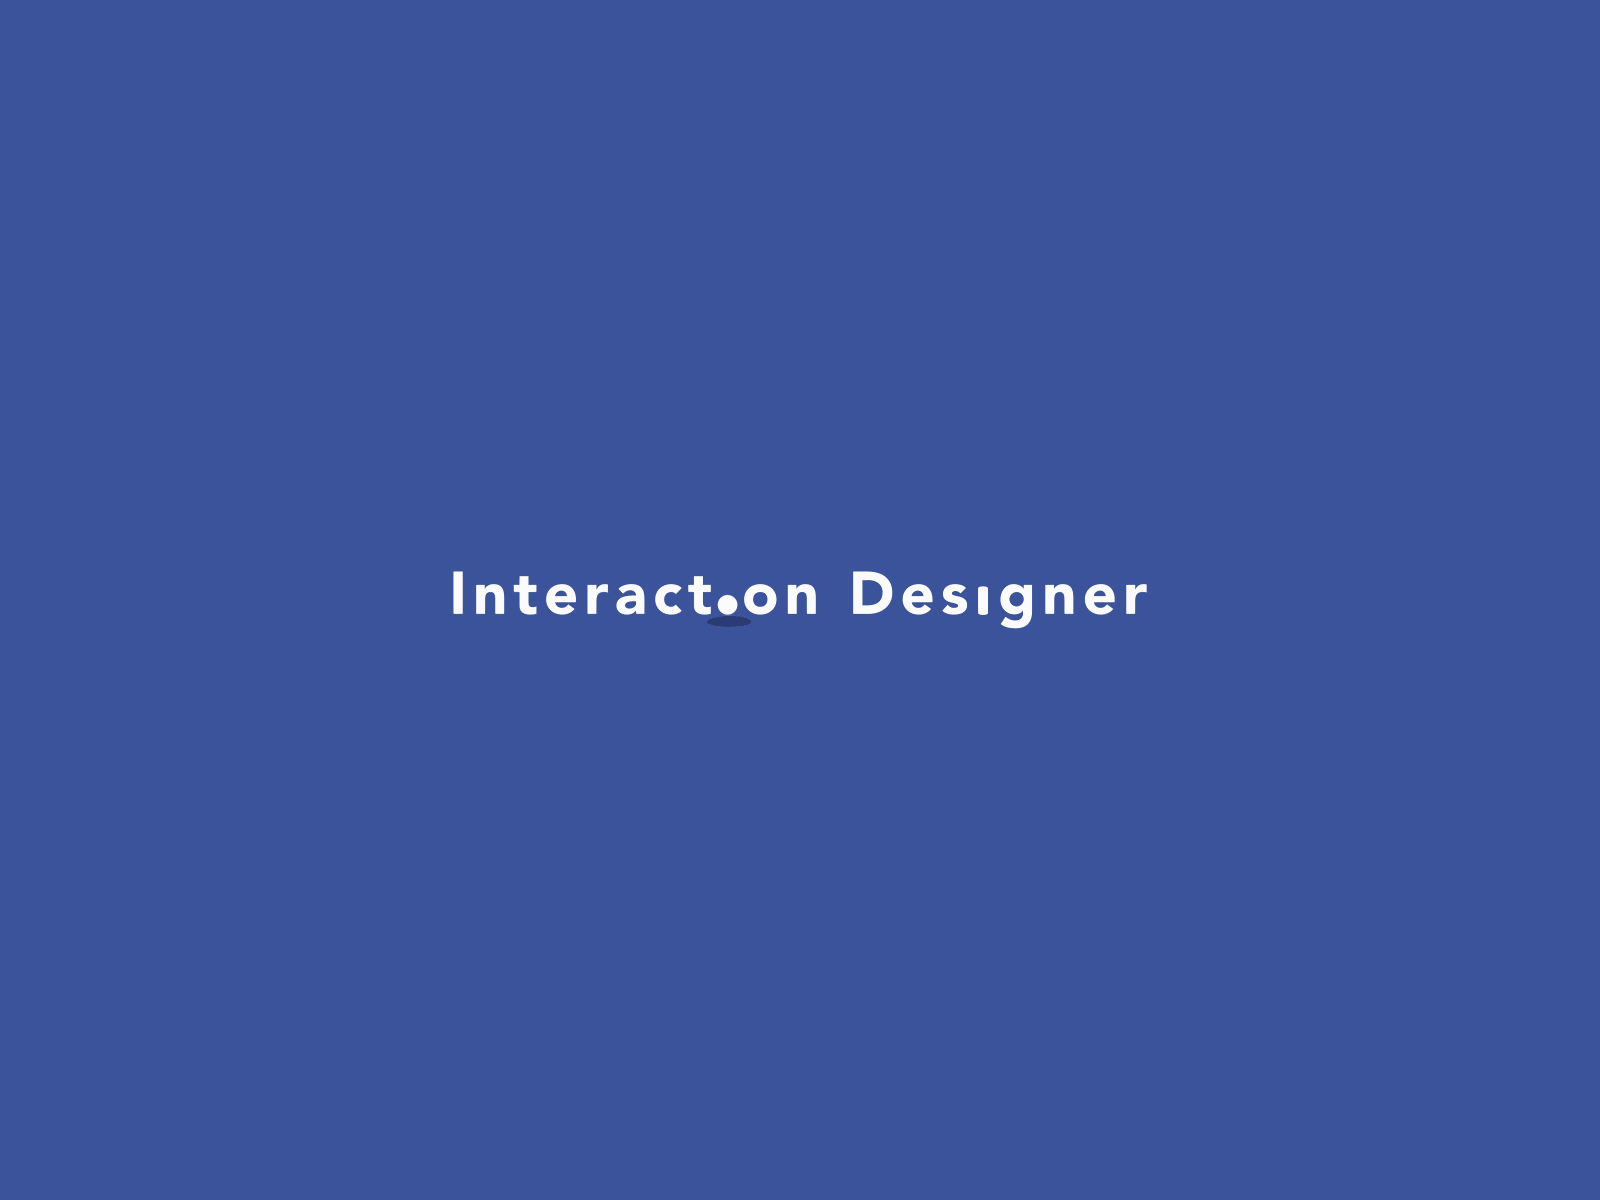 IxD aftereffects interaction design ixd microinteraction